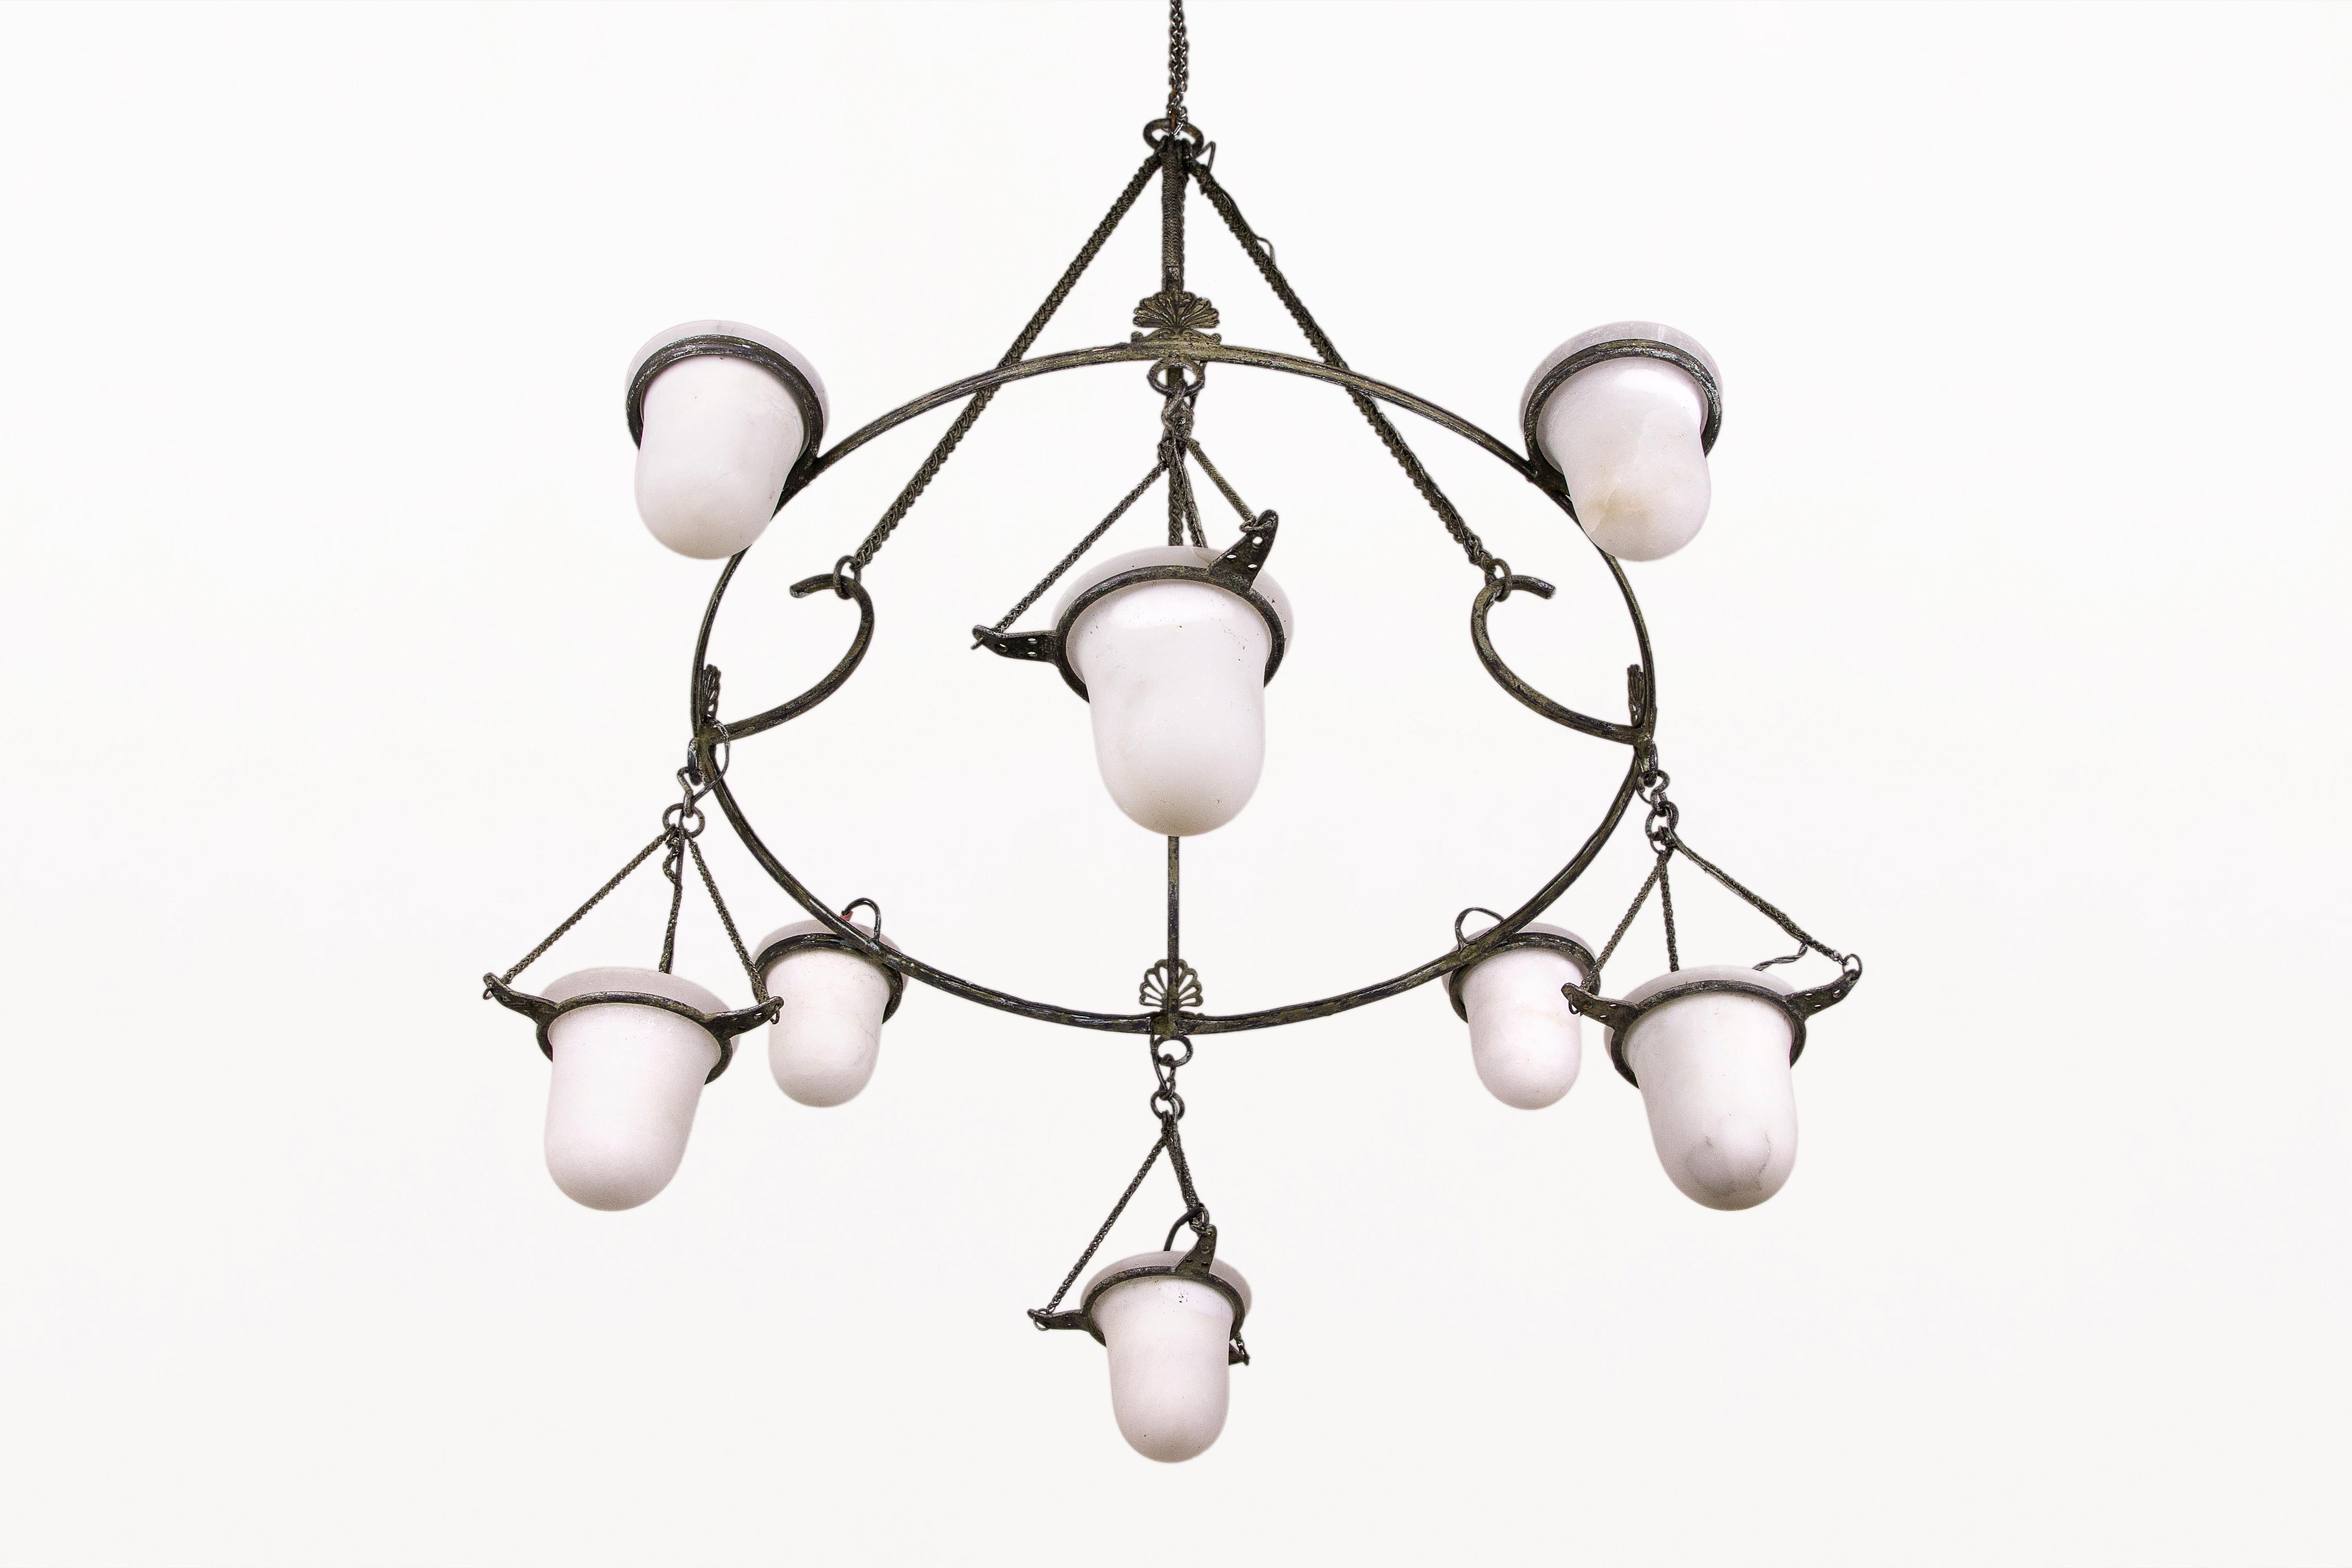 Neoclassical bronze chandelier.
Eight hanging alabaster cups, each electrified with an individual bulb.
Bronze structure in the style of a Greek Antiquities chandelier.
Circa 2000 France.
Good vintage condition.